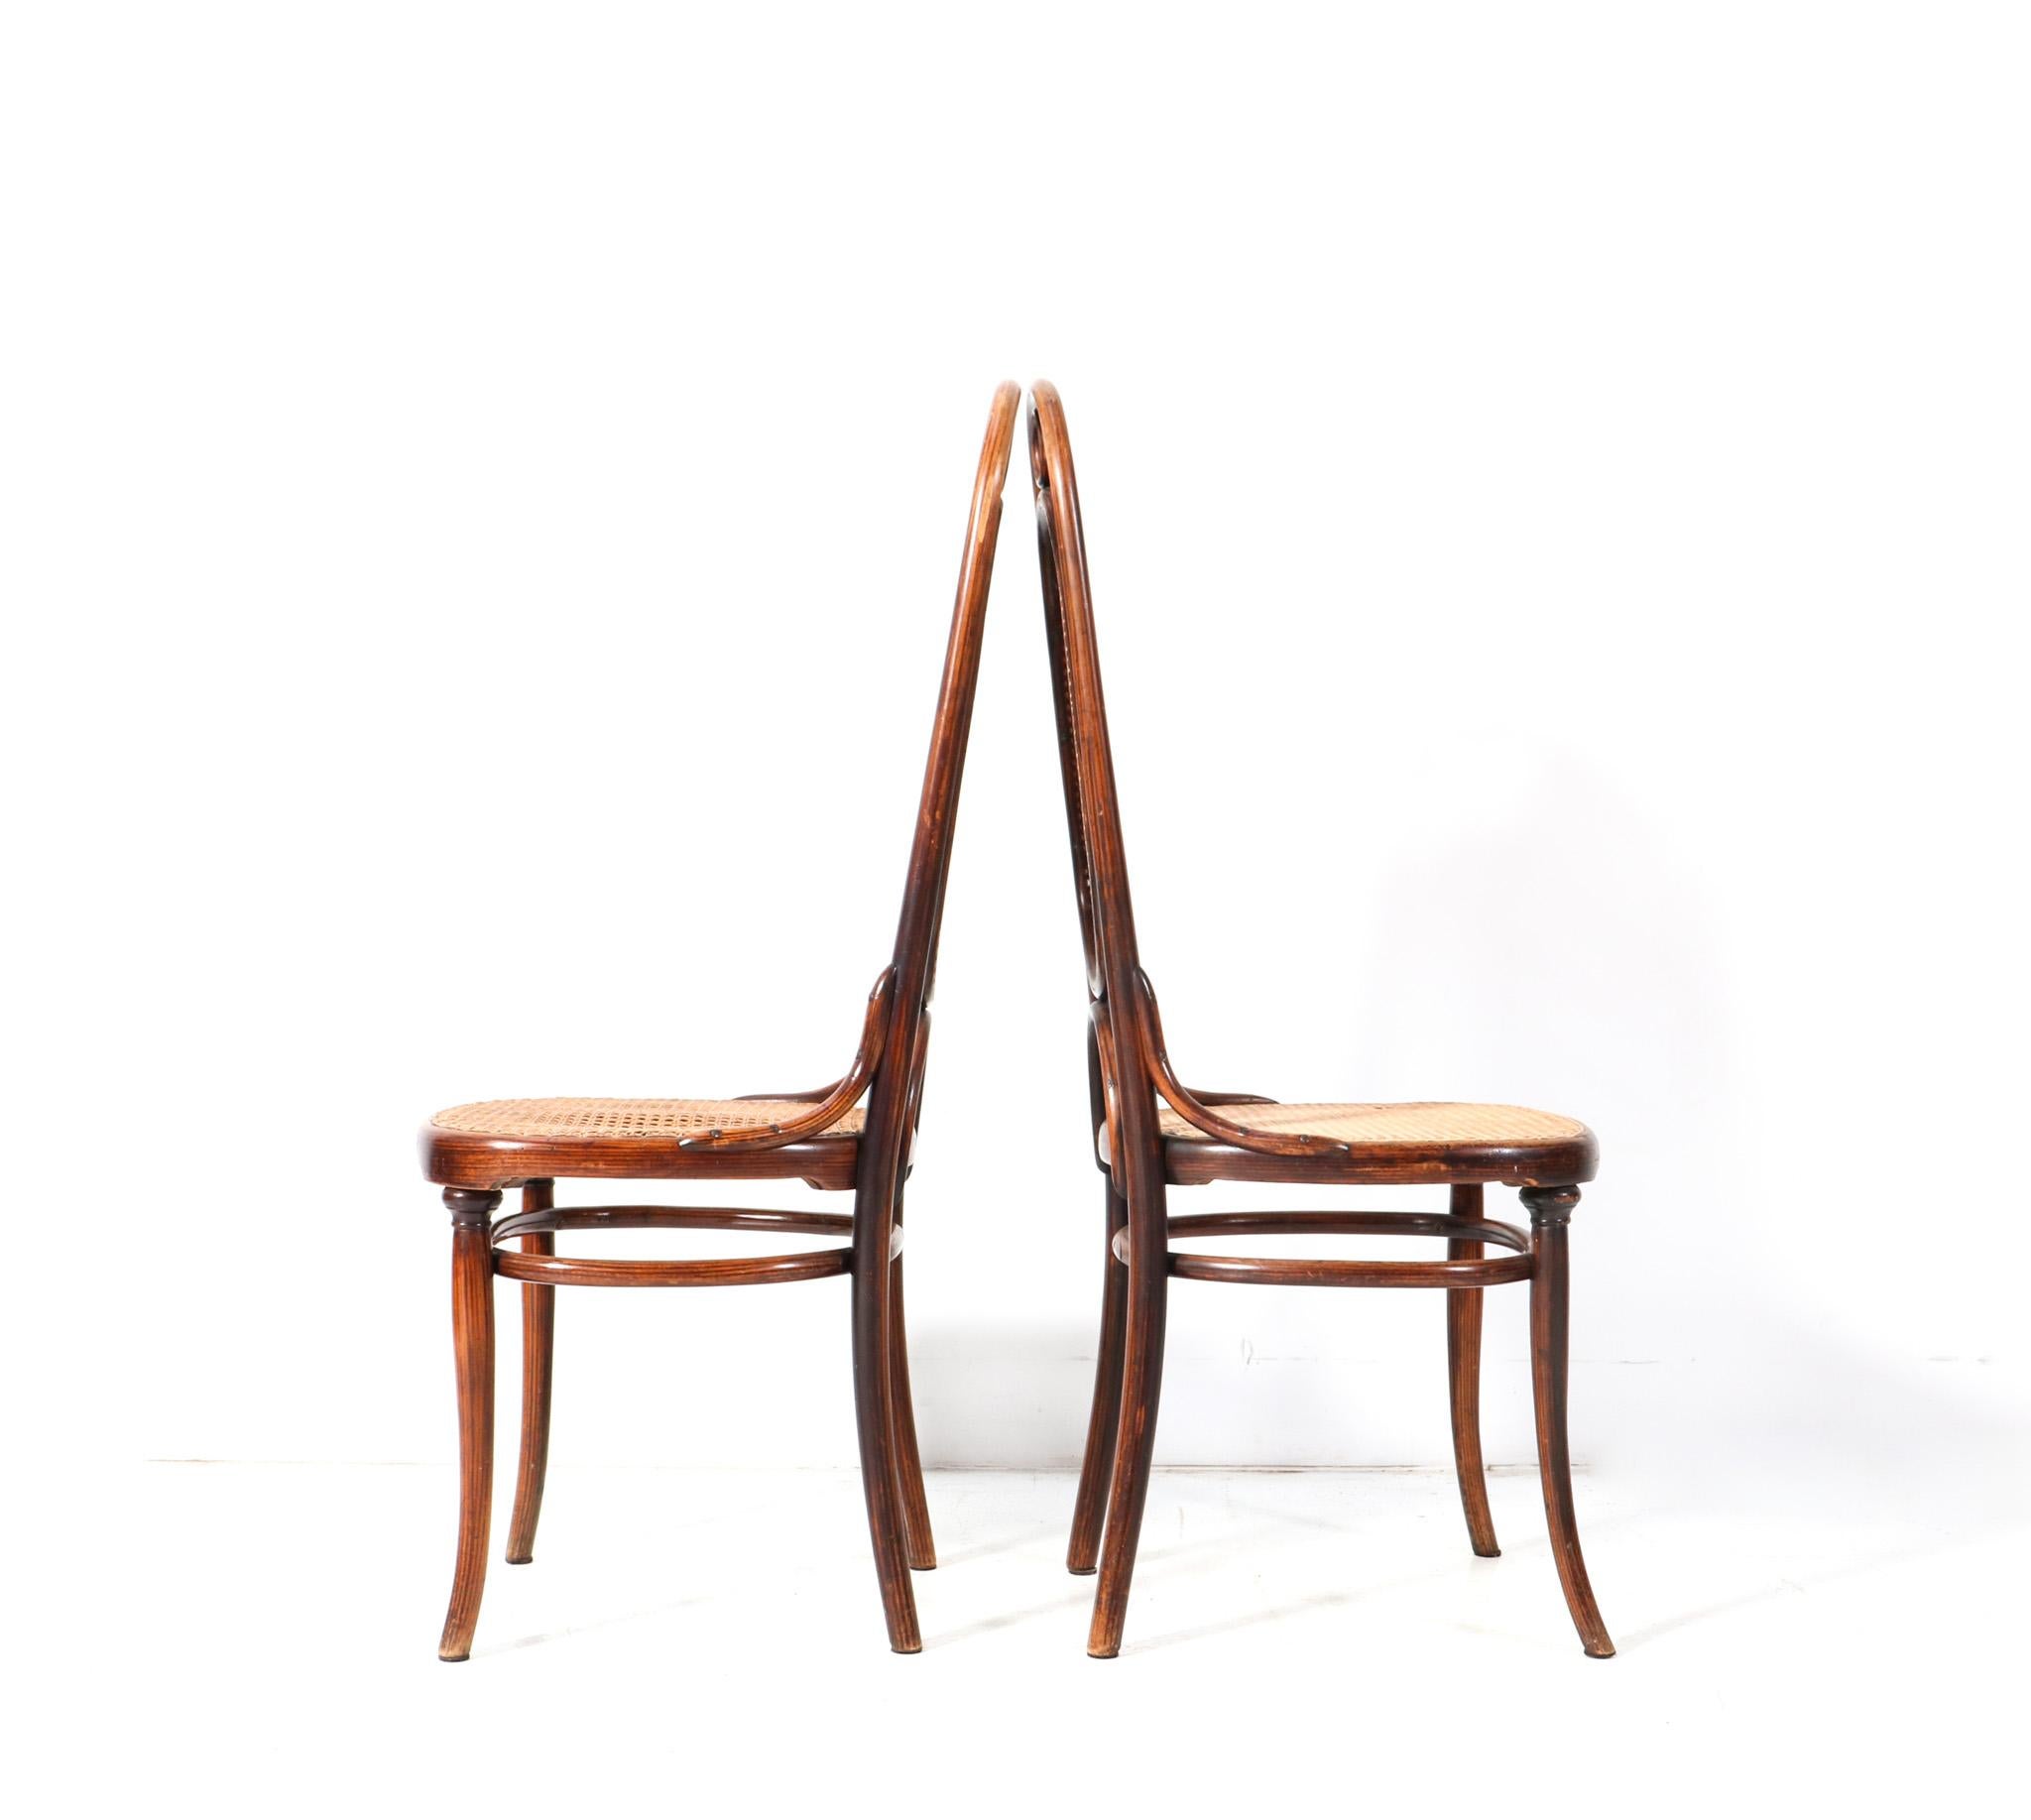 Austrian Pair of Beech Art Nouveau High Back Chairs Model 17 by Michael Thonet, 1890s For Sale